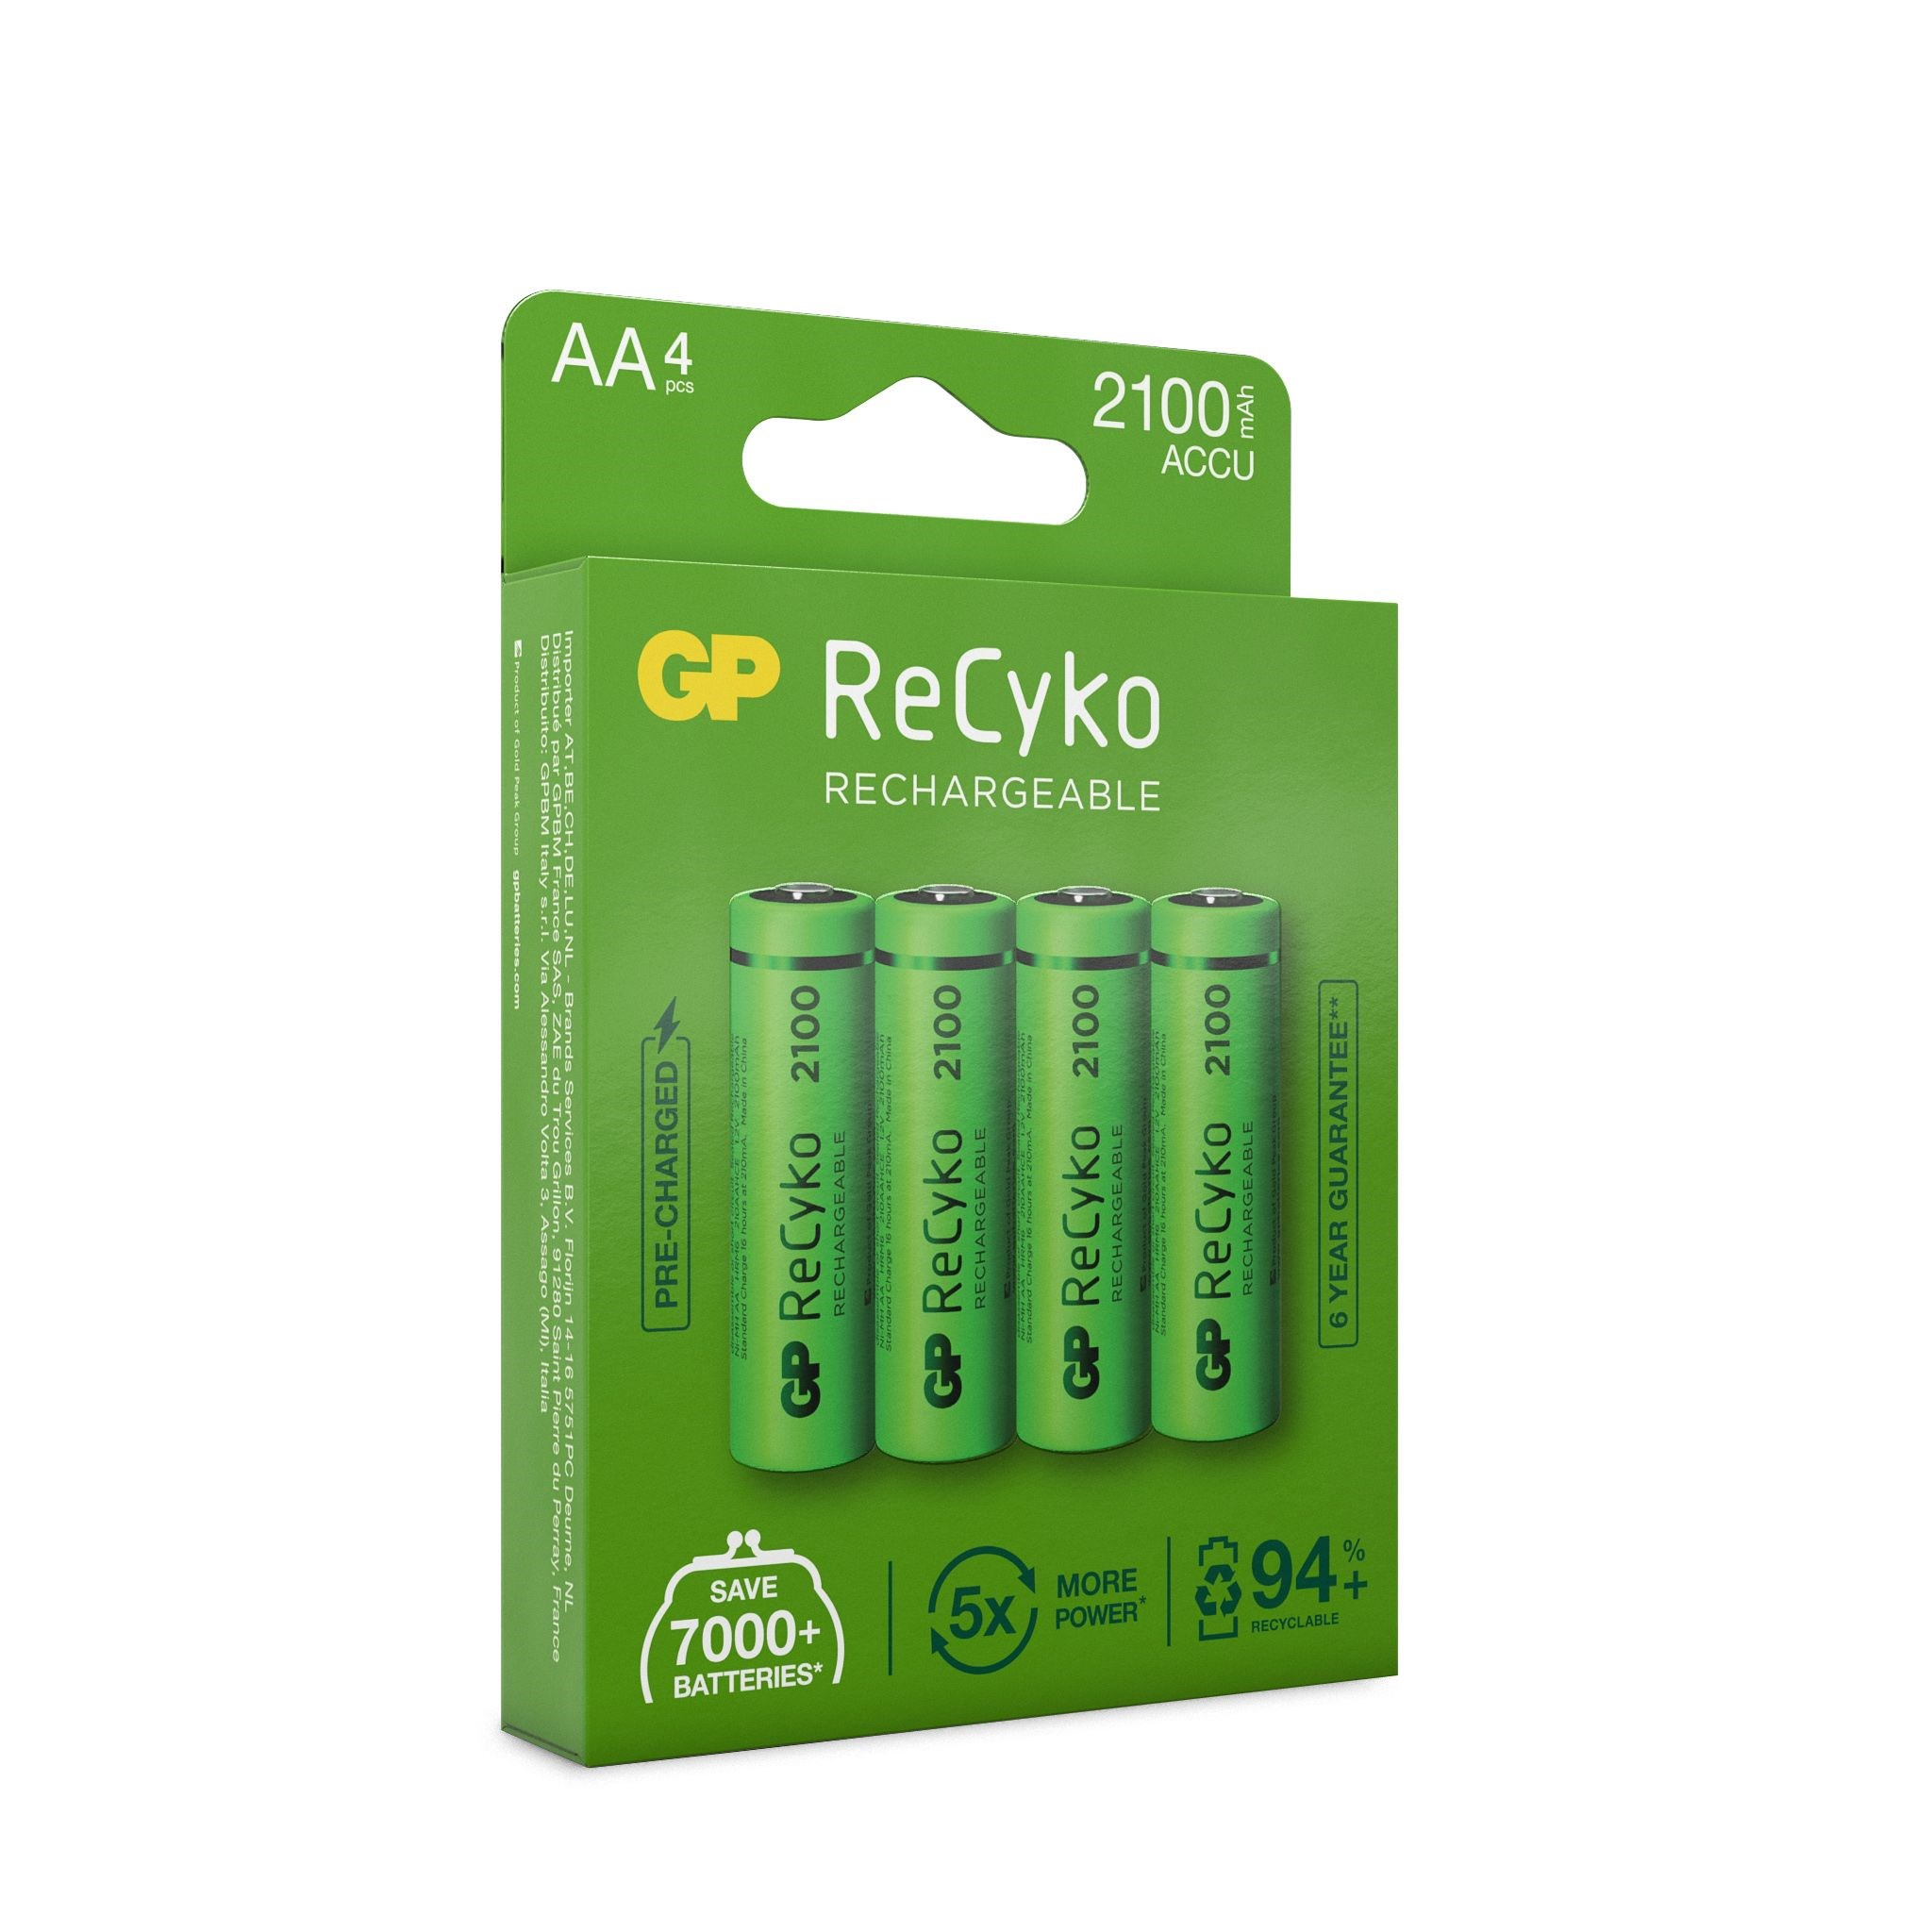 GP ReCyko Rechargeable Battery AA 4PC/Pack 2100mAh